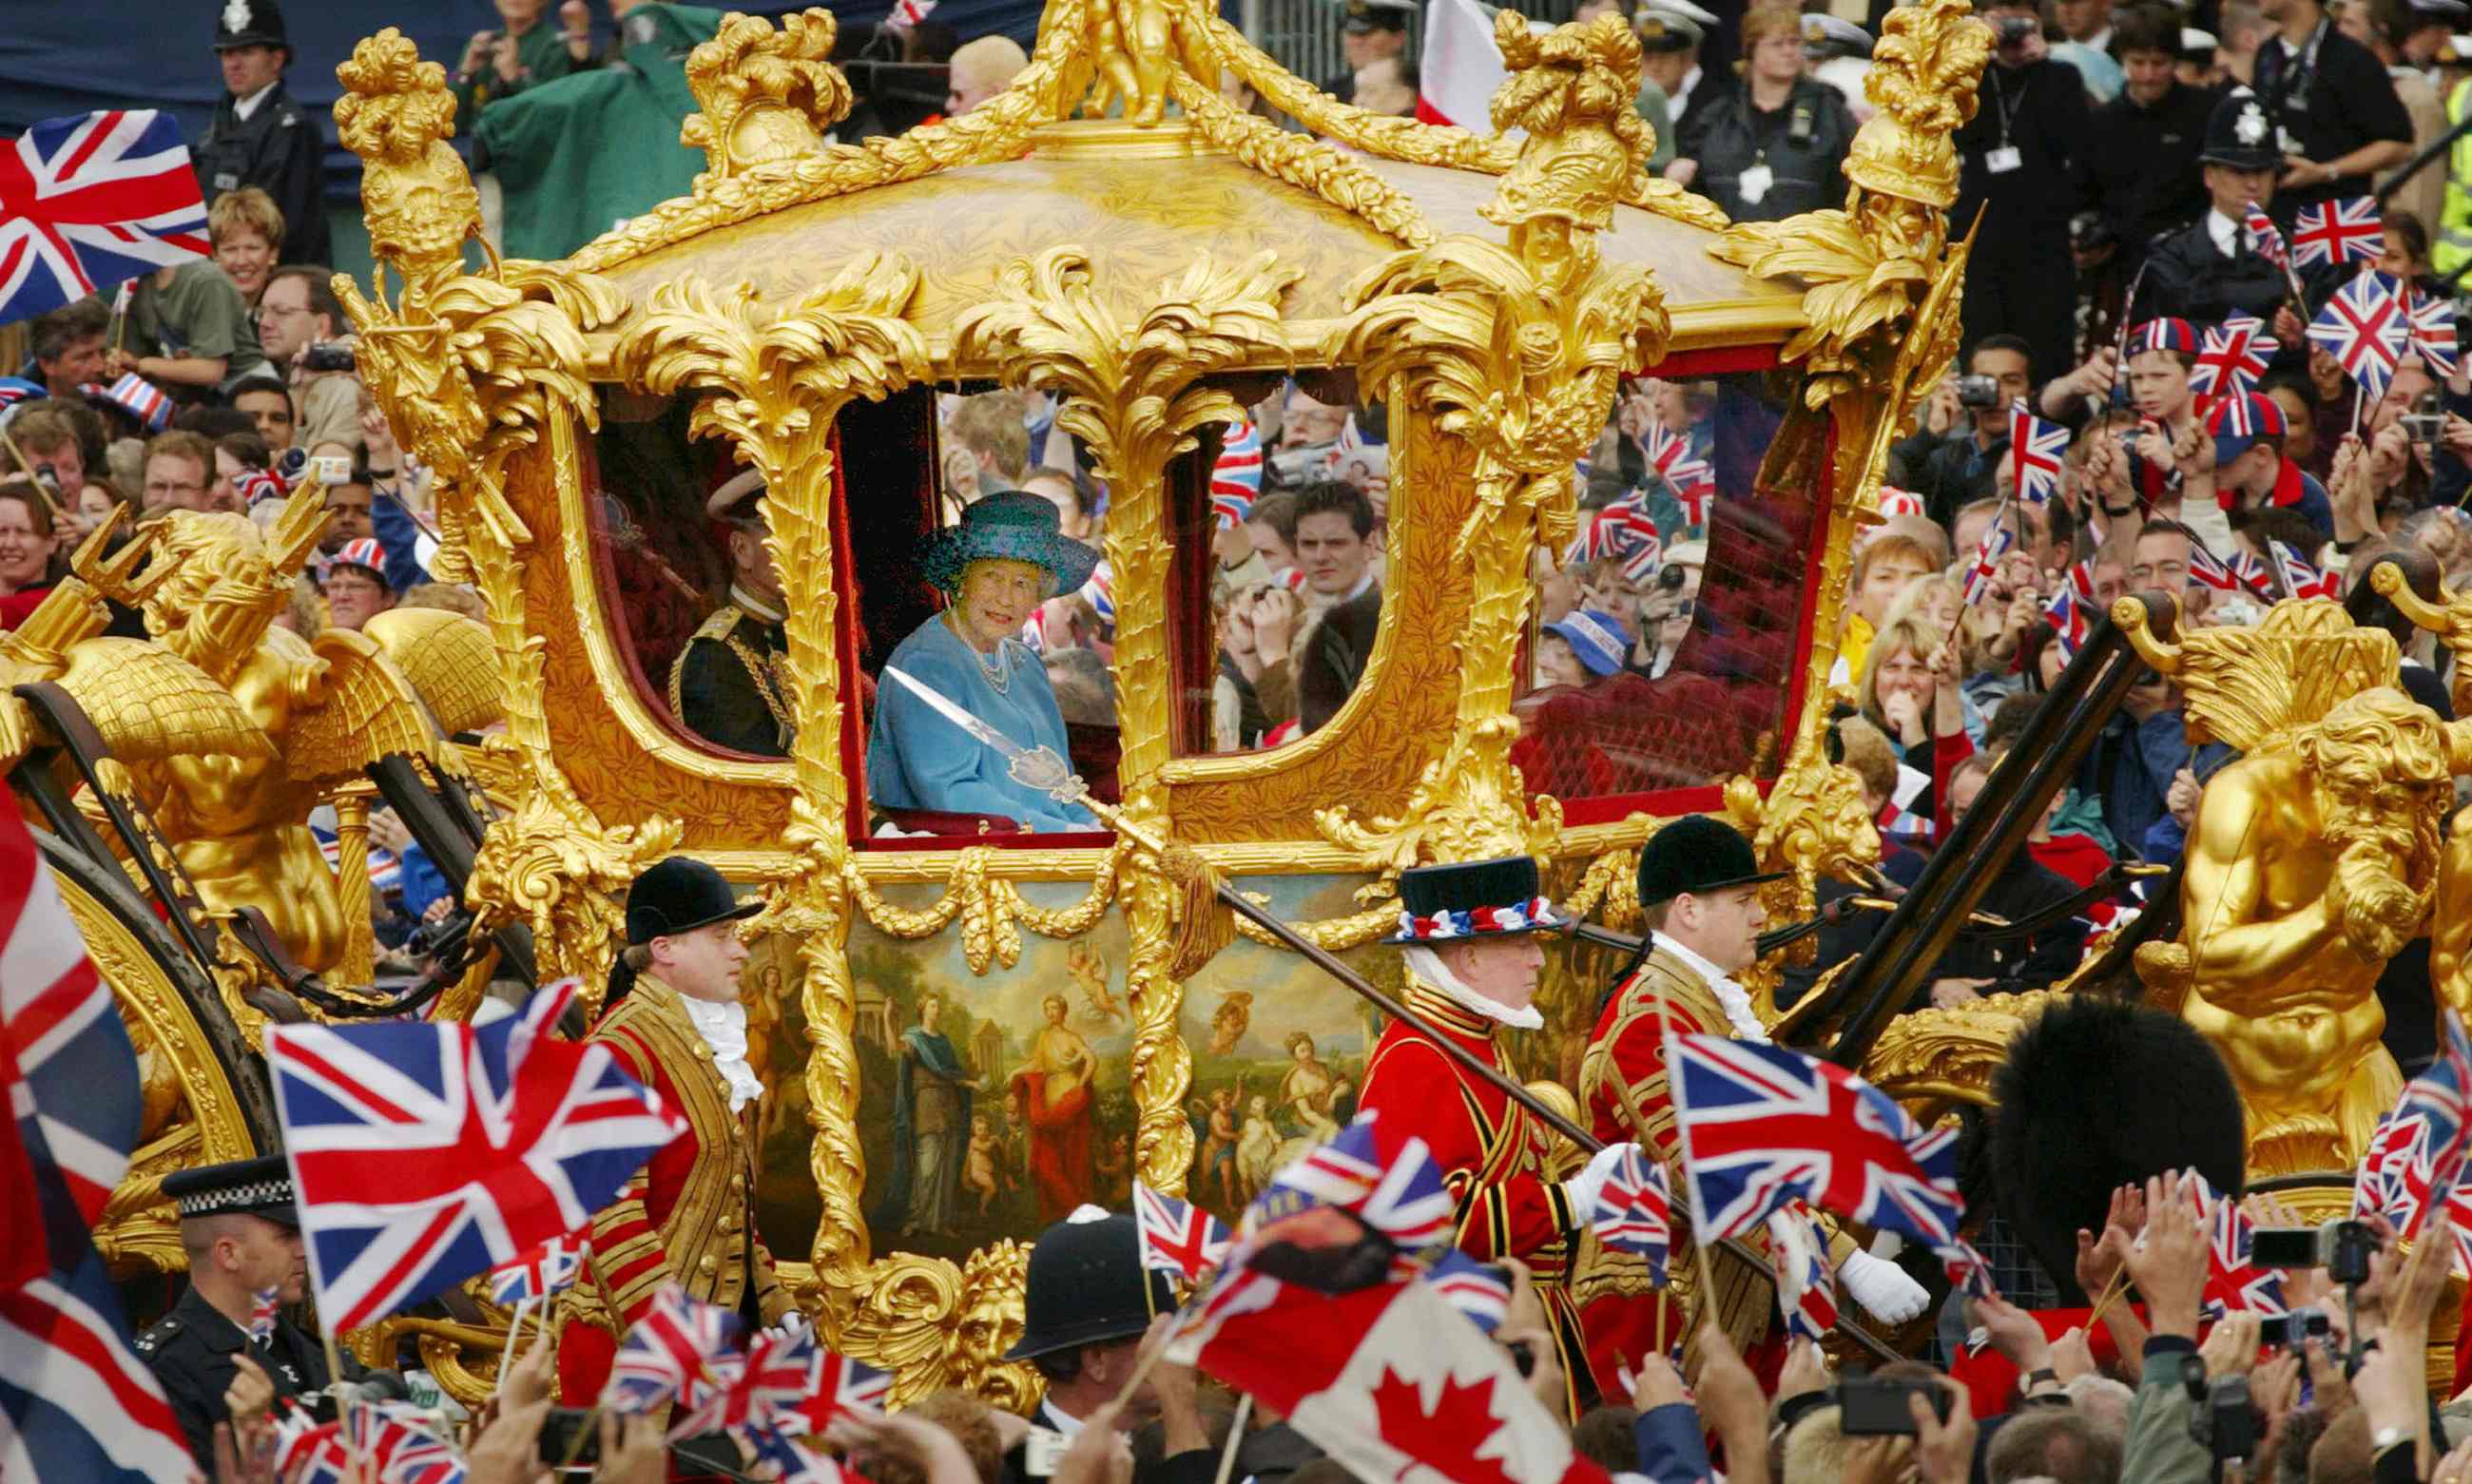 Queen Elizabeth and the Duke of Edinburgh ride in the Golden State Carriage at the head of a parade HD Wallpaper